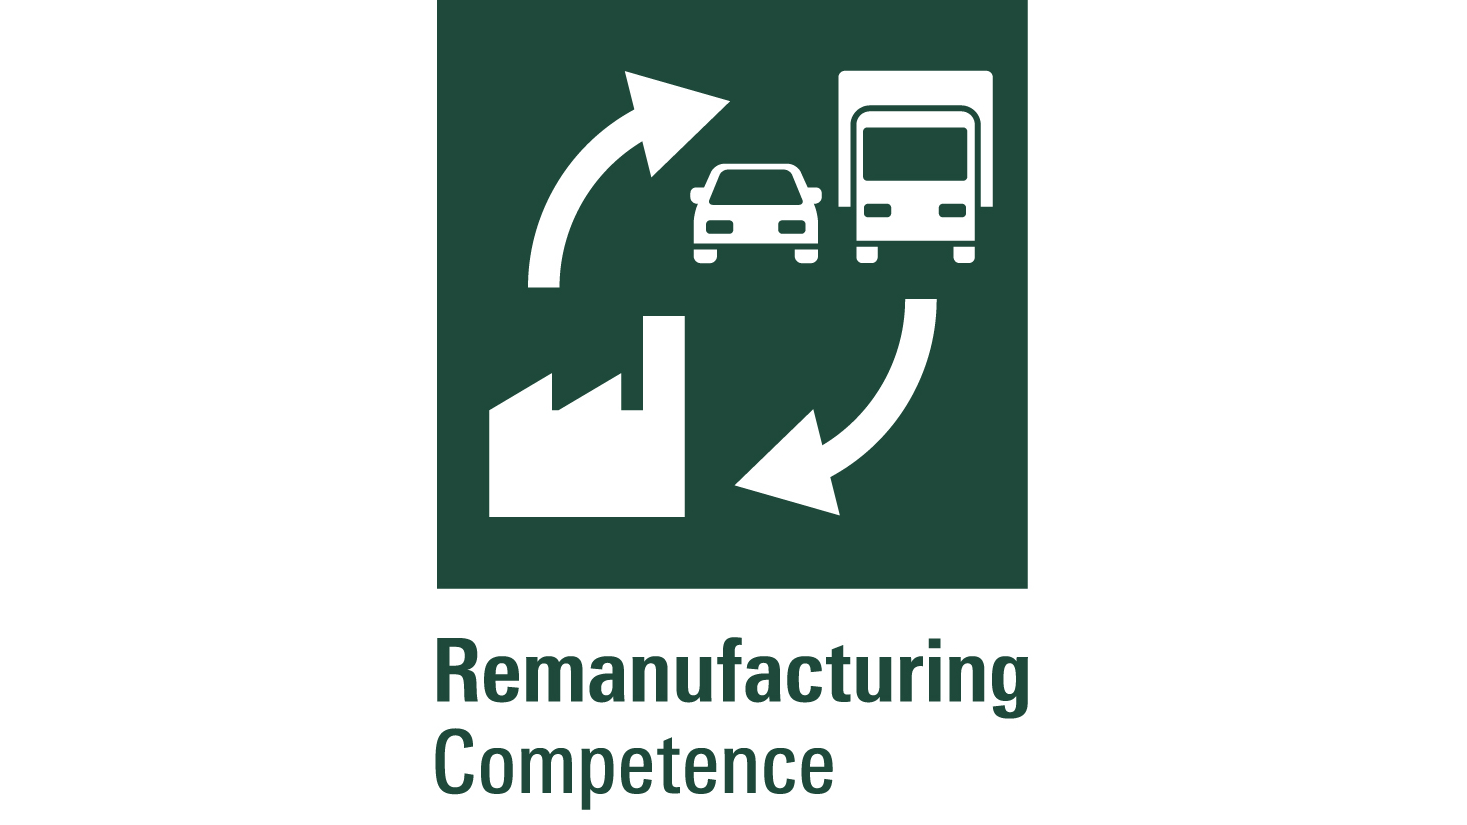 Remanufacturing Competence Logo